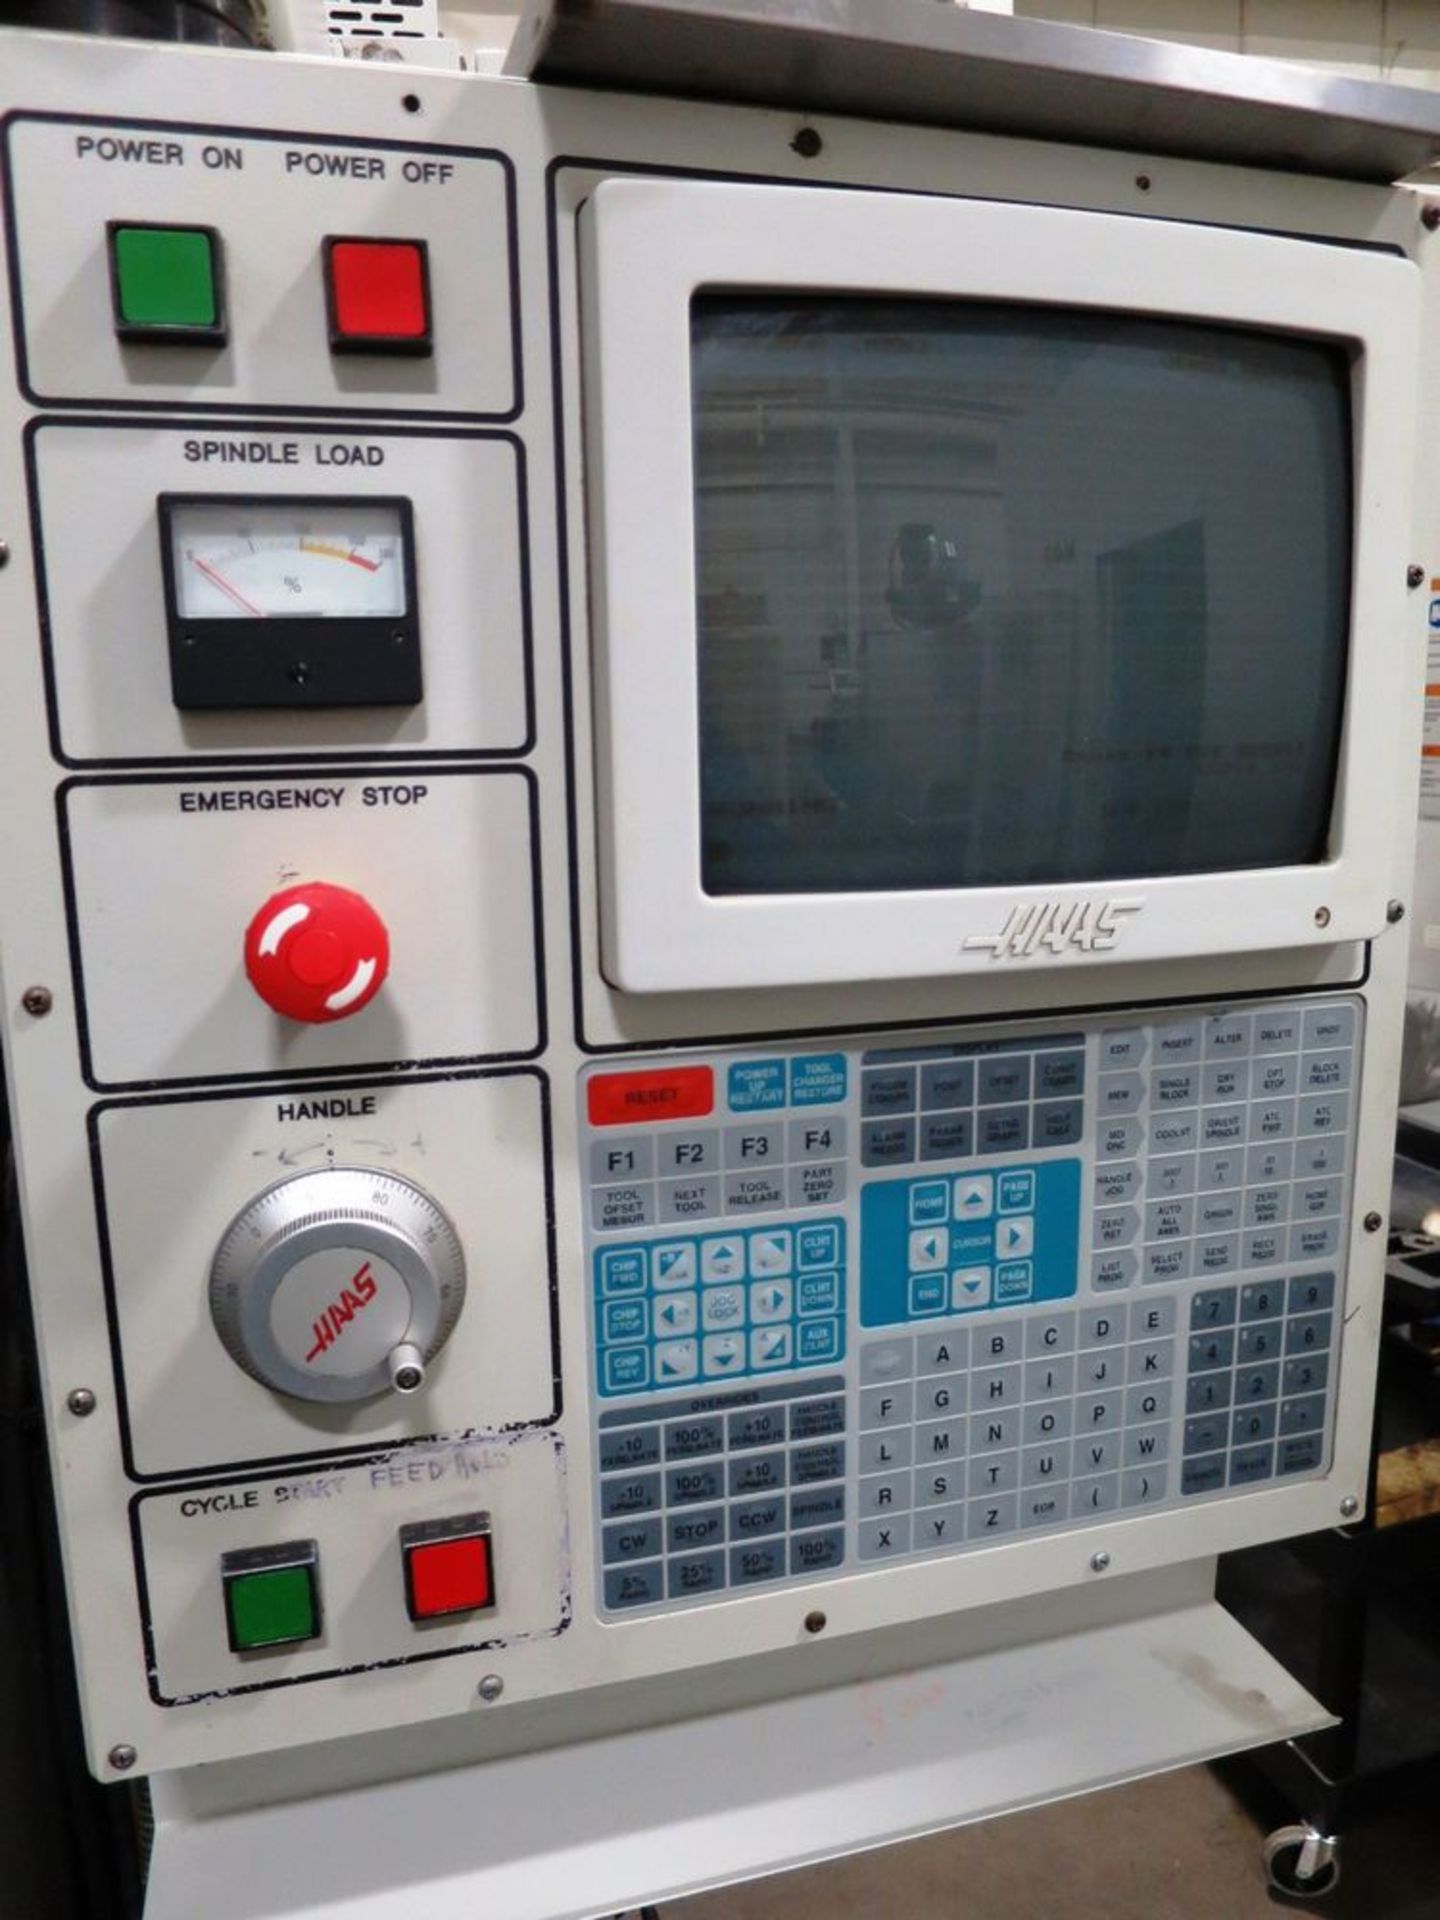 16"x16" Haas HS-1RP CNC Horizontal Machining Center, S/N 50113, New 1996 General Specifications, - Image 2 of 10